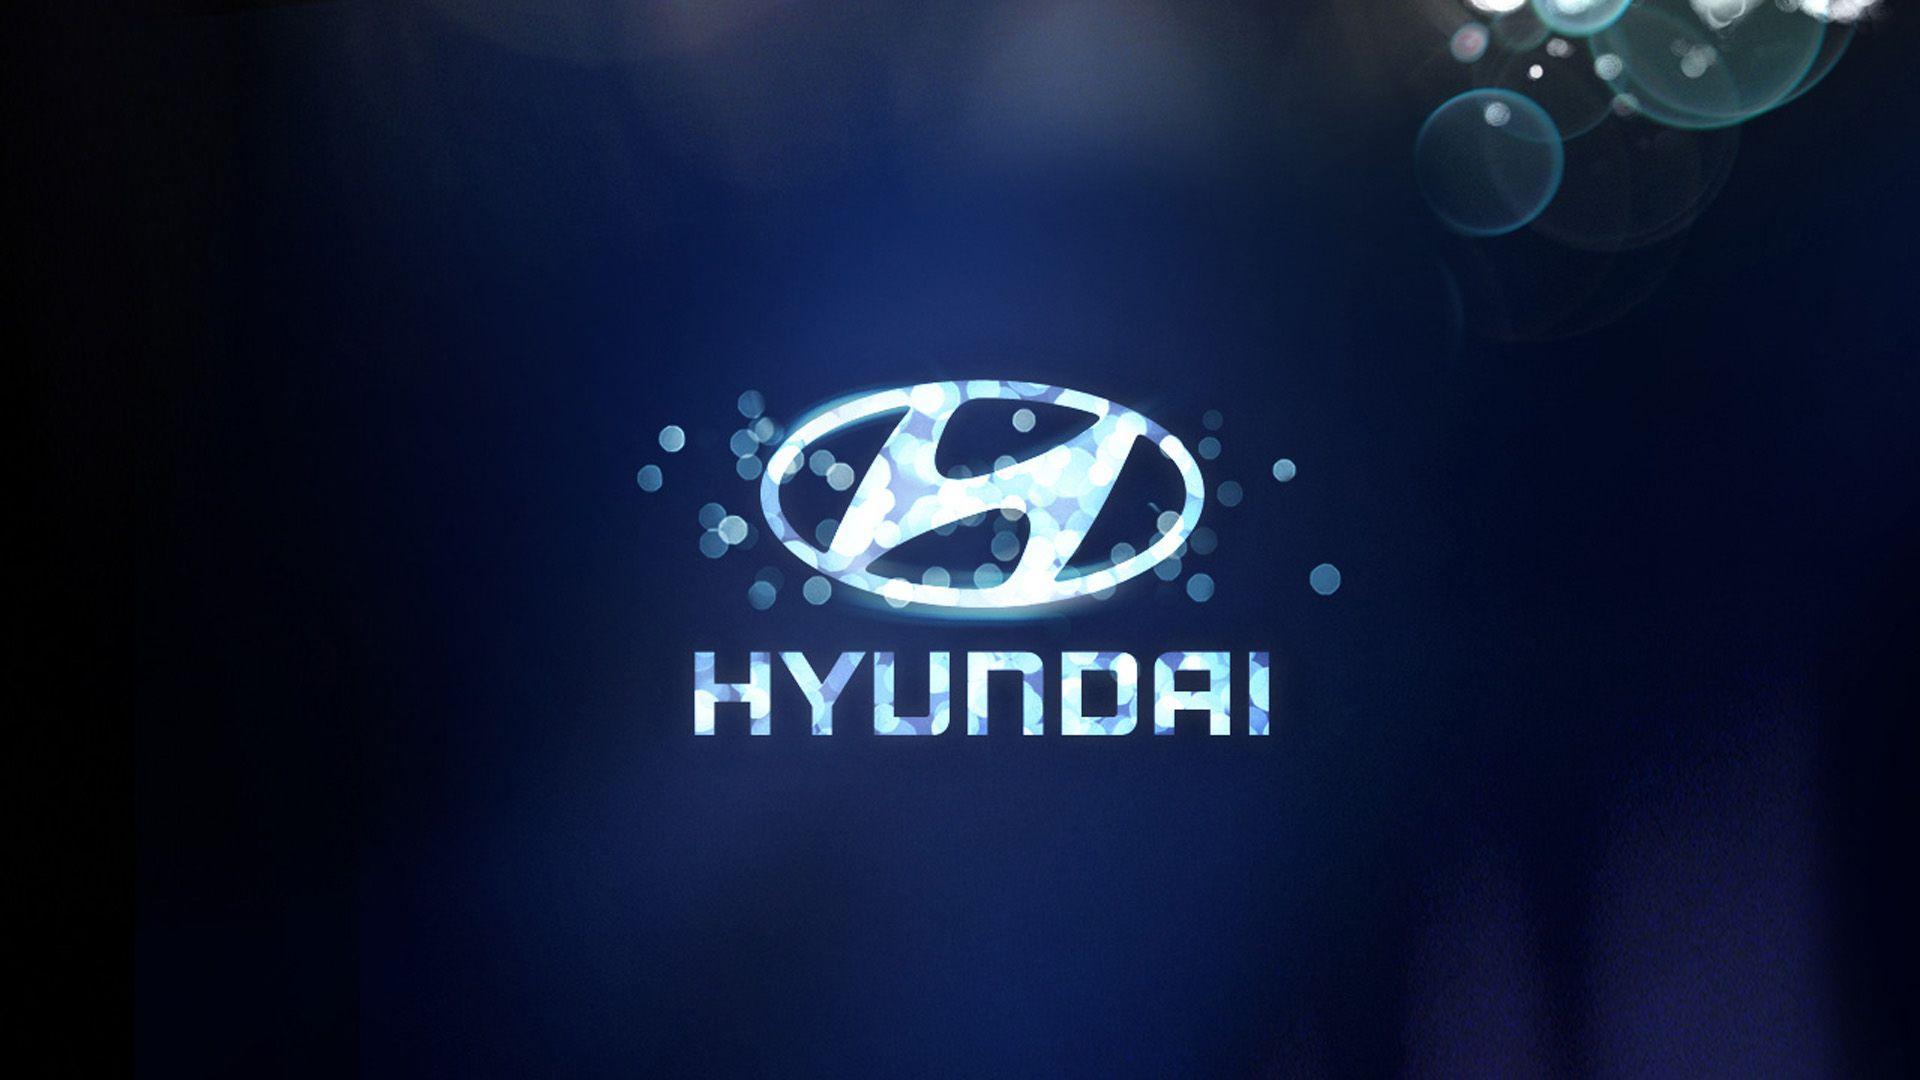 Hyundai Wallpapers, Hyundai Backgrounds Collection for Mobile